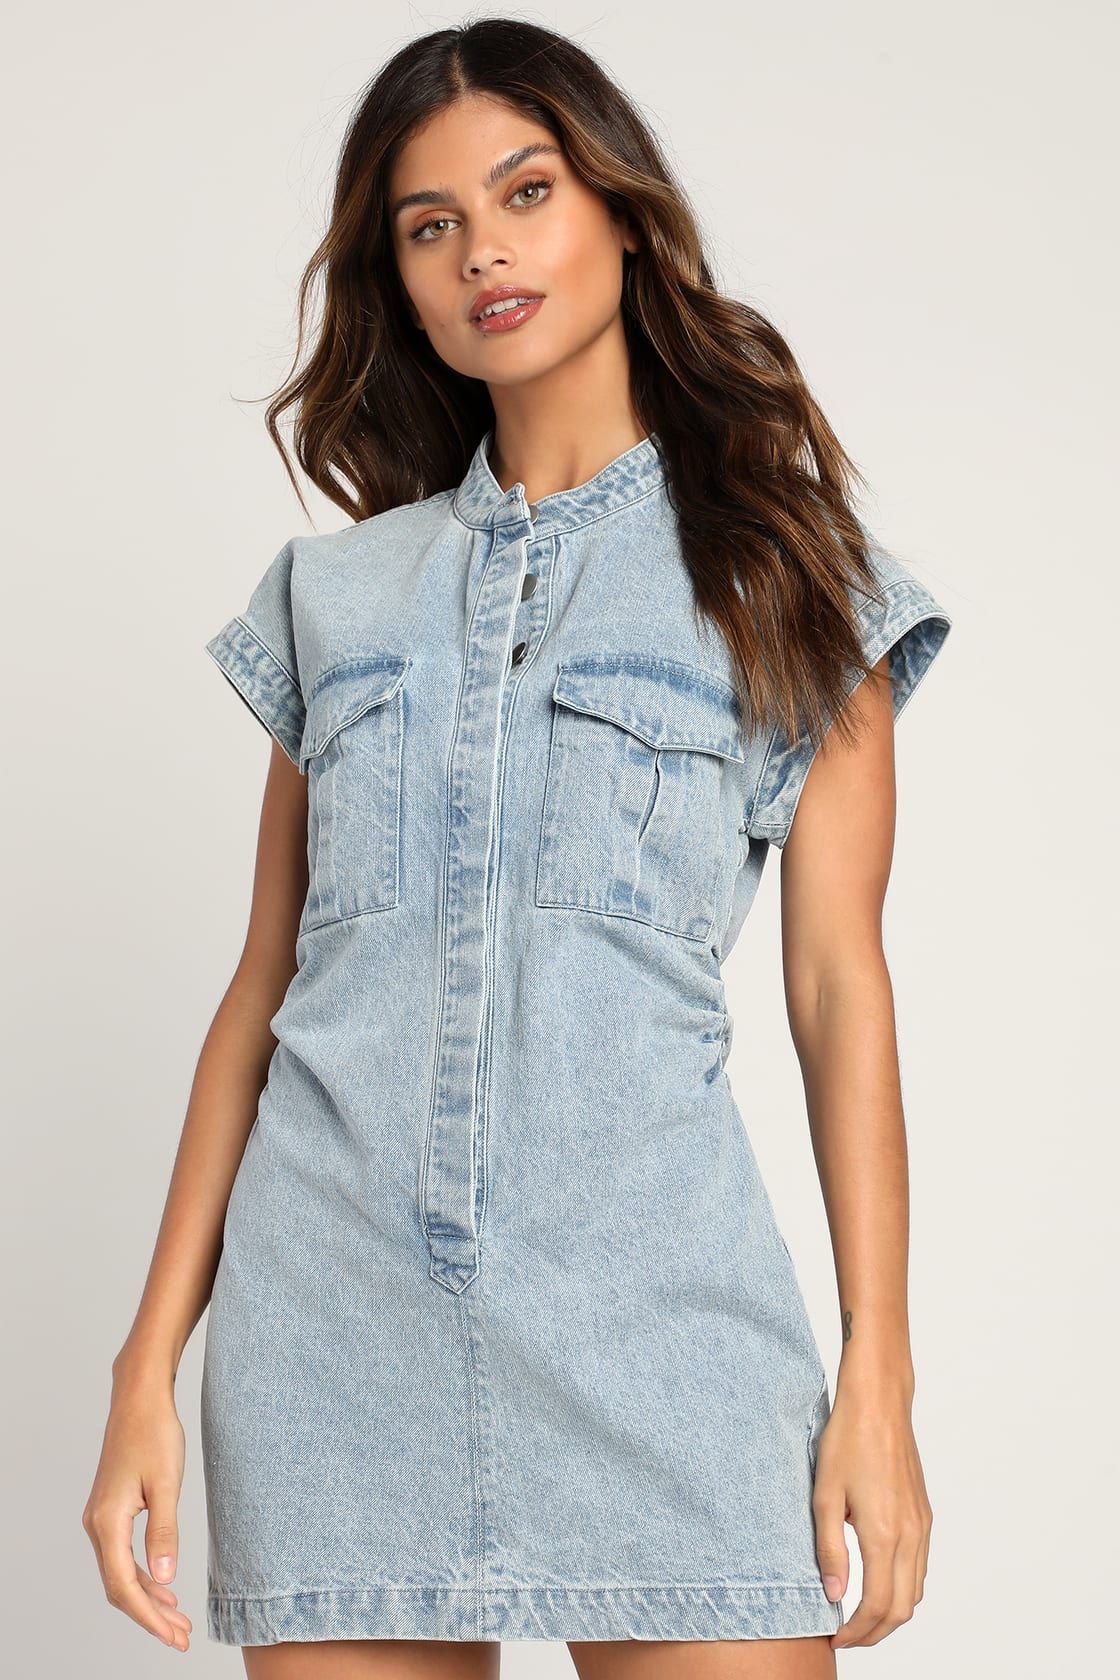 On this Sweet Day Light Wash Denim Button-Front Mini Dress | Lulus